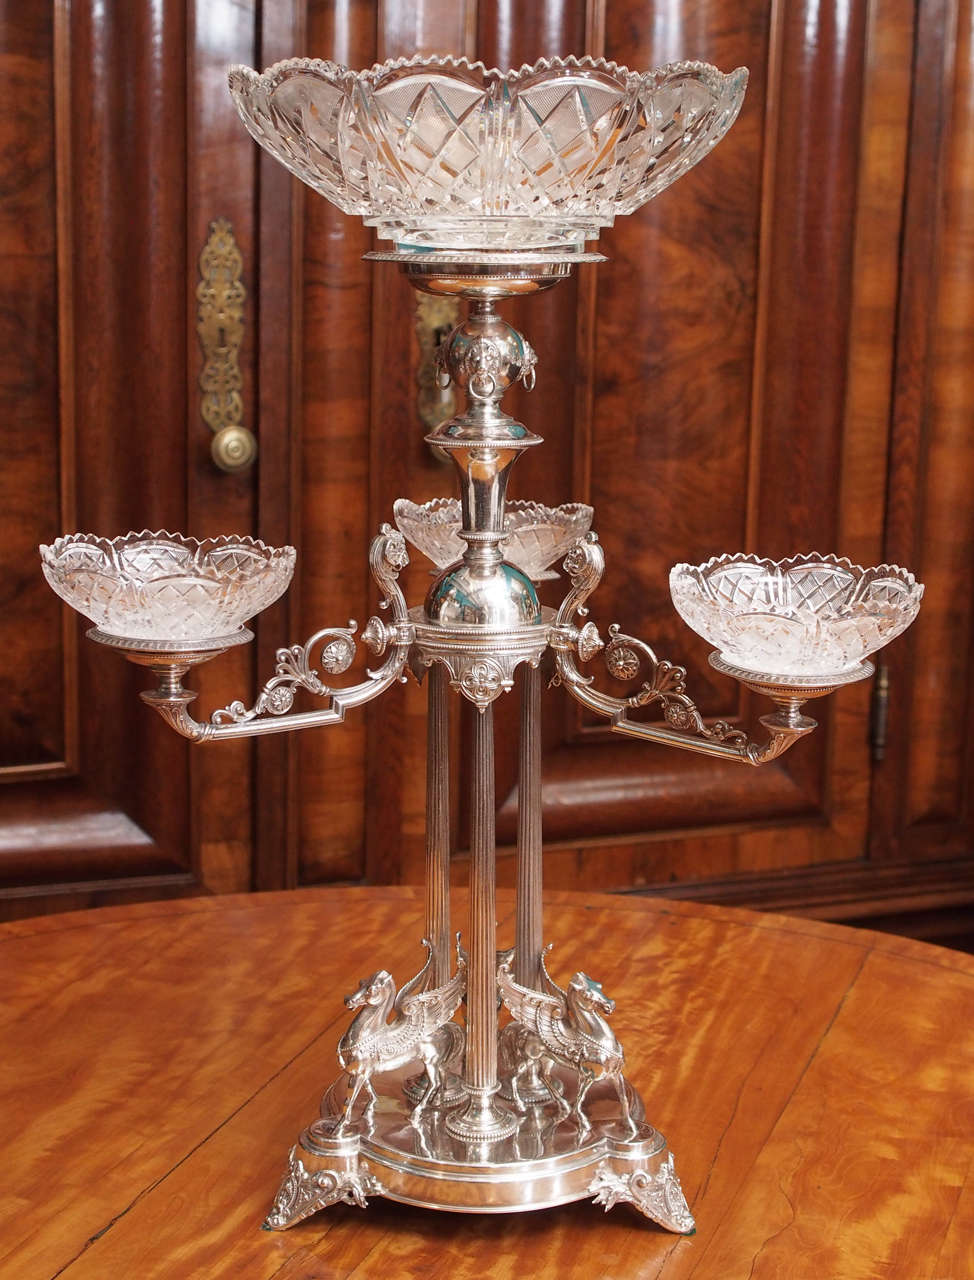 Extravagant and exceptional late 19th century English plated silver three arm epergne in the Elkington taste, with classical ornamentation, including rams, lions and winged horses, four cut crystal bowls, circa 1875.